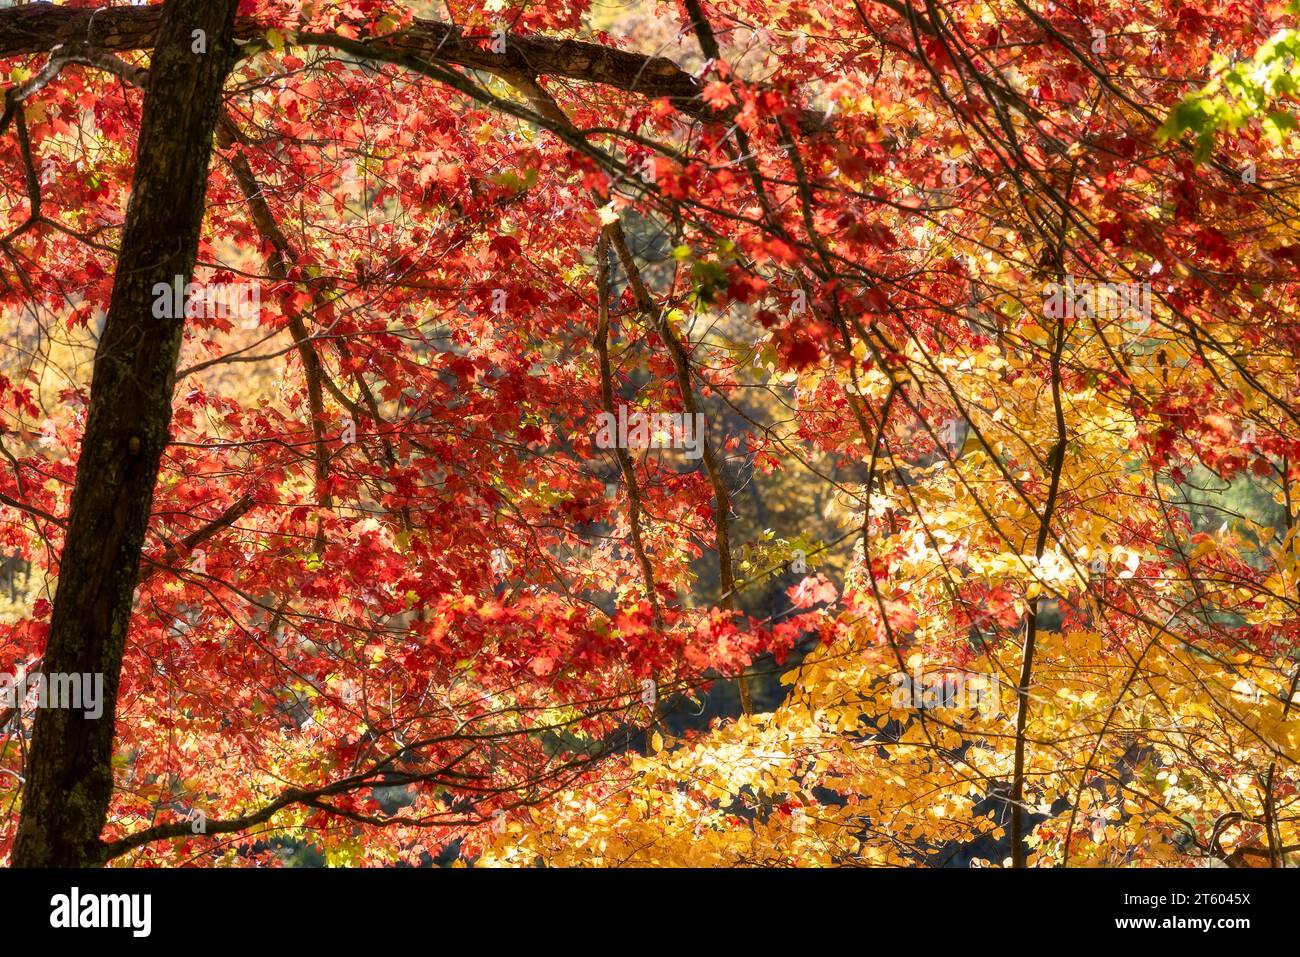 Vibrant reds and golden warm yellows on a tree at the Peak of Autumn in Western North Carolina Stock Photo